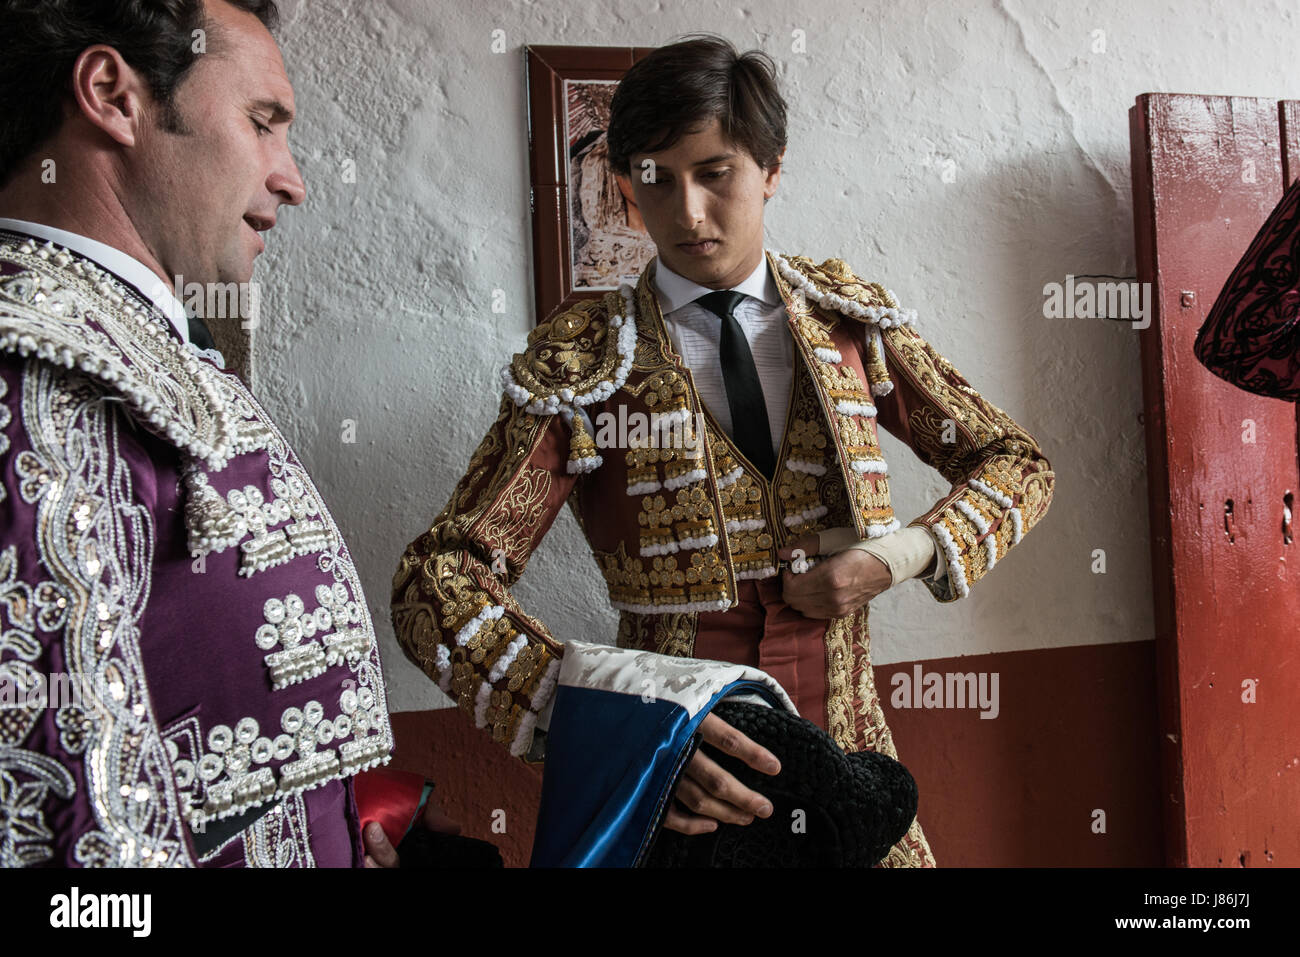 Caceres, Spain. 27th May, 2017. Peruvian bullfighter Roca Rey(center) and Antonio Ferrera (left) moments before of the bullfighting celebrated as part of the San Fernando Fair at the bullring in Cáceres, Spain Credit: Esteban Martinena Guerrero/Alamy Live News Stock Photo